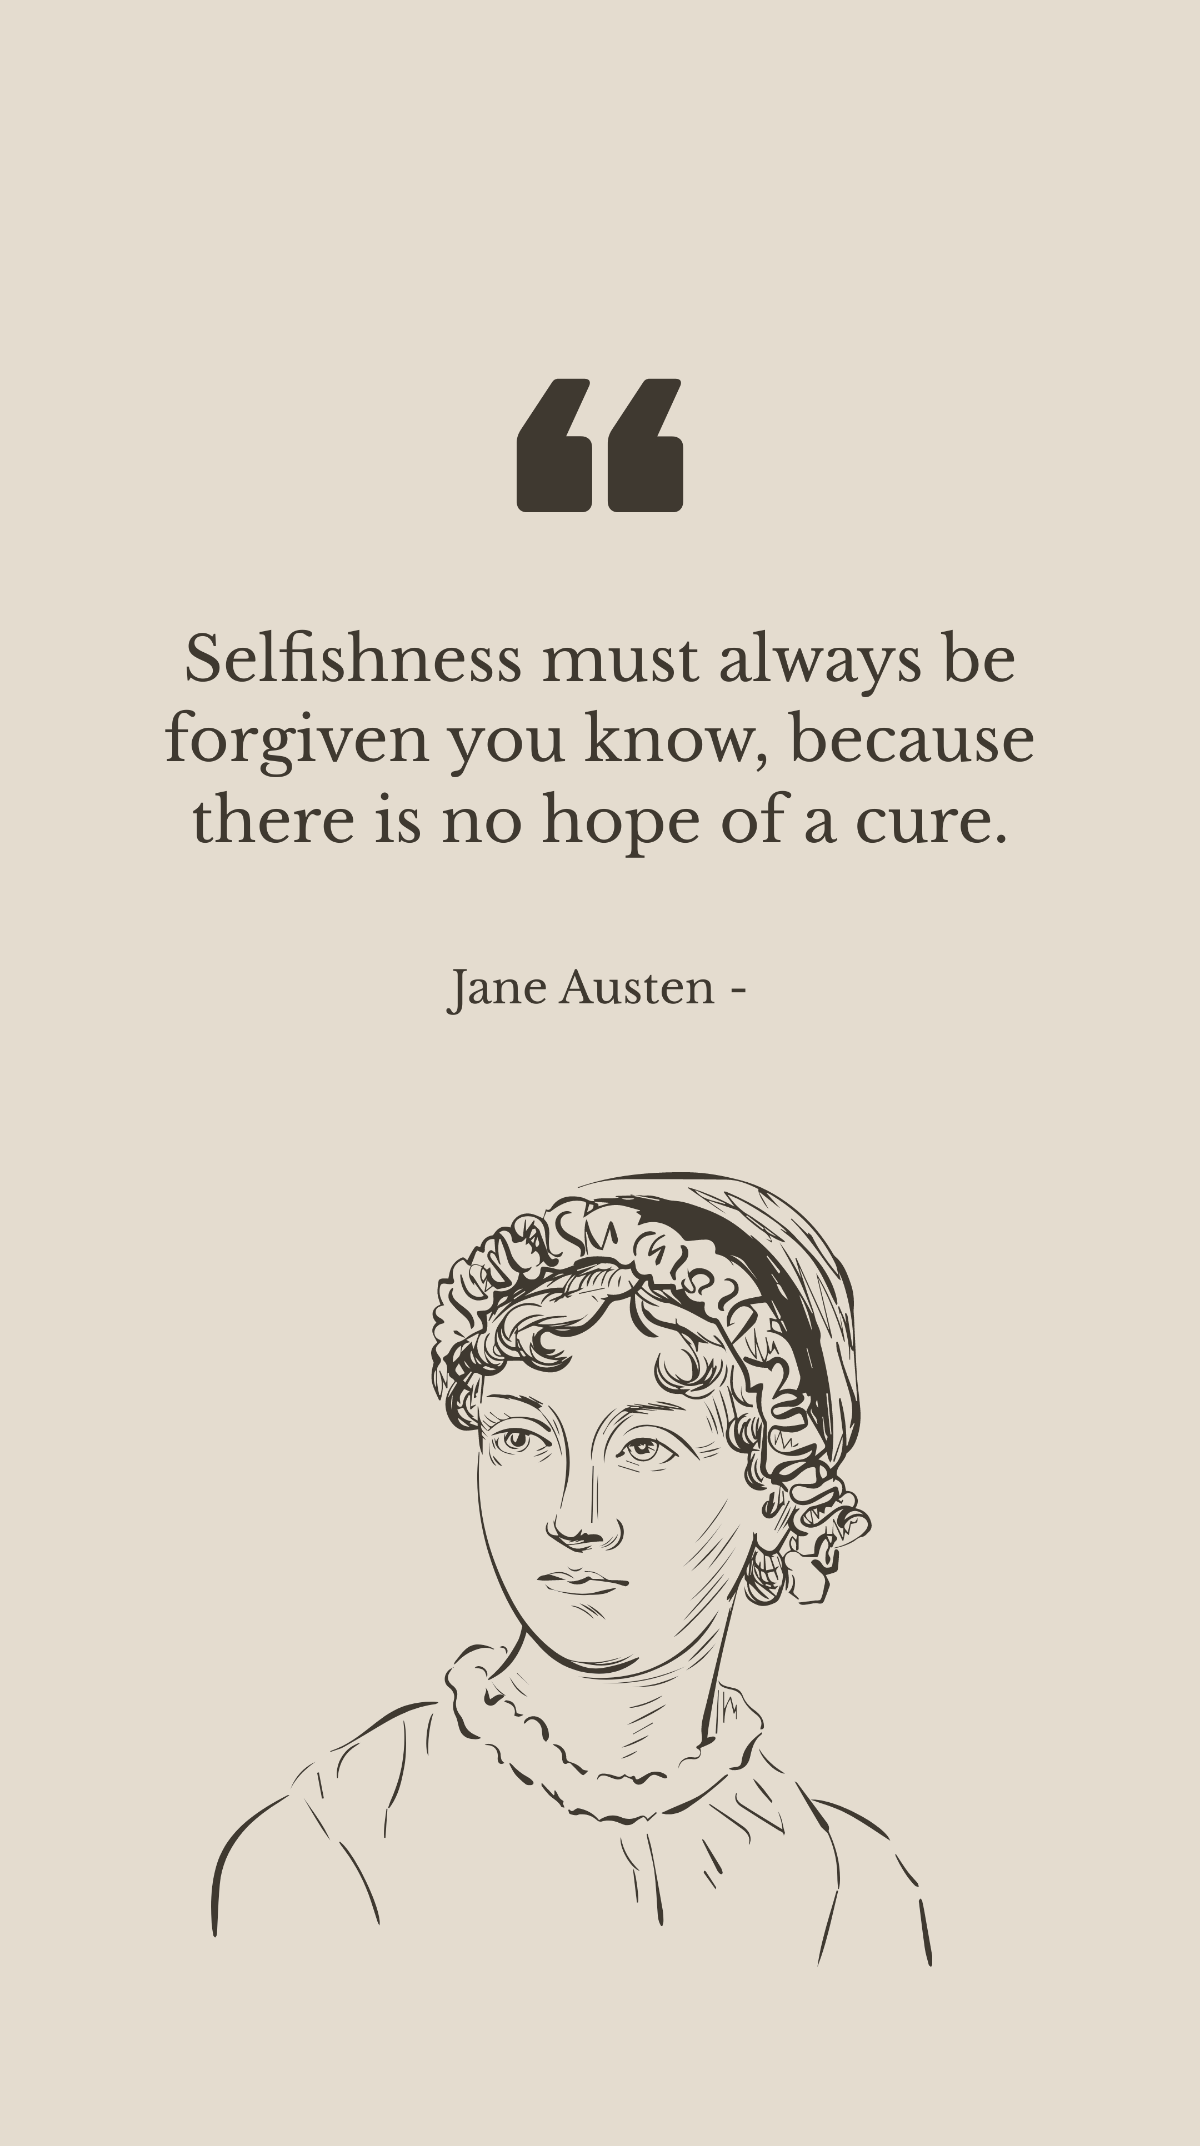 Jane Austen - Selfishness must always be forgiven you know, because there is no hope of a cure. Template